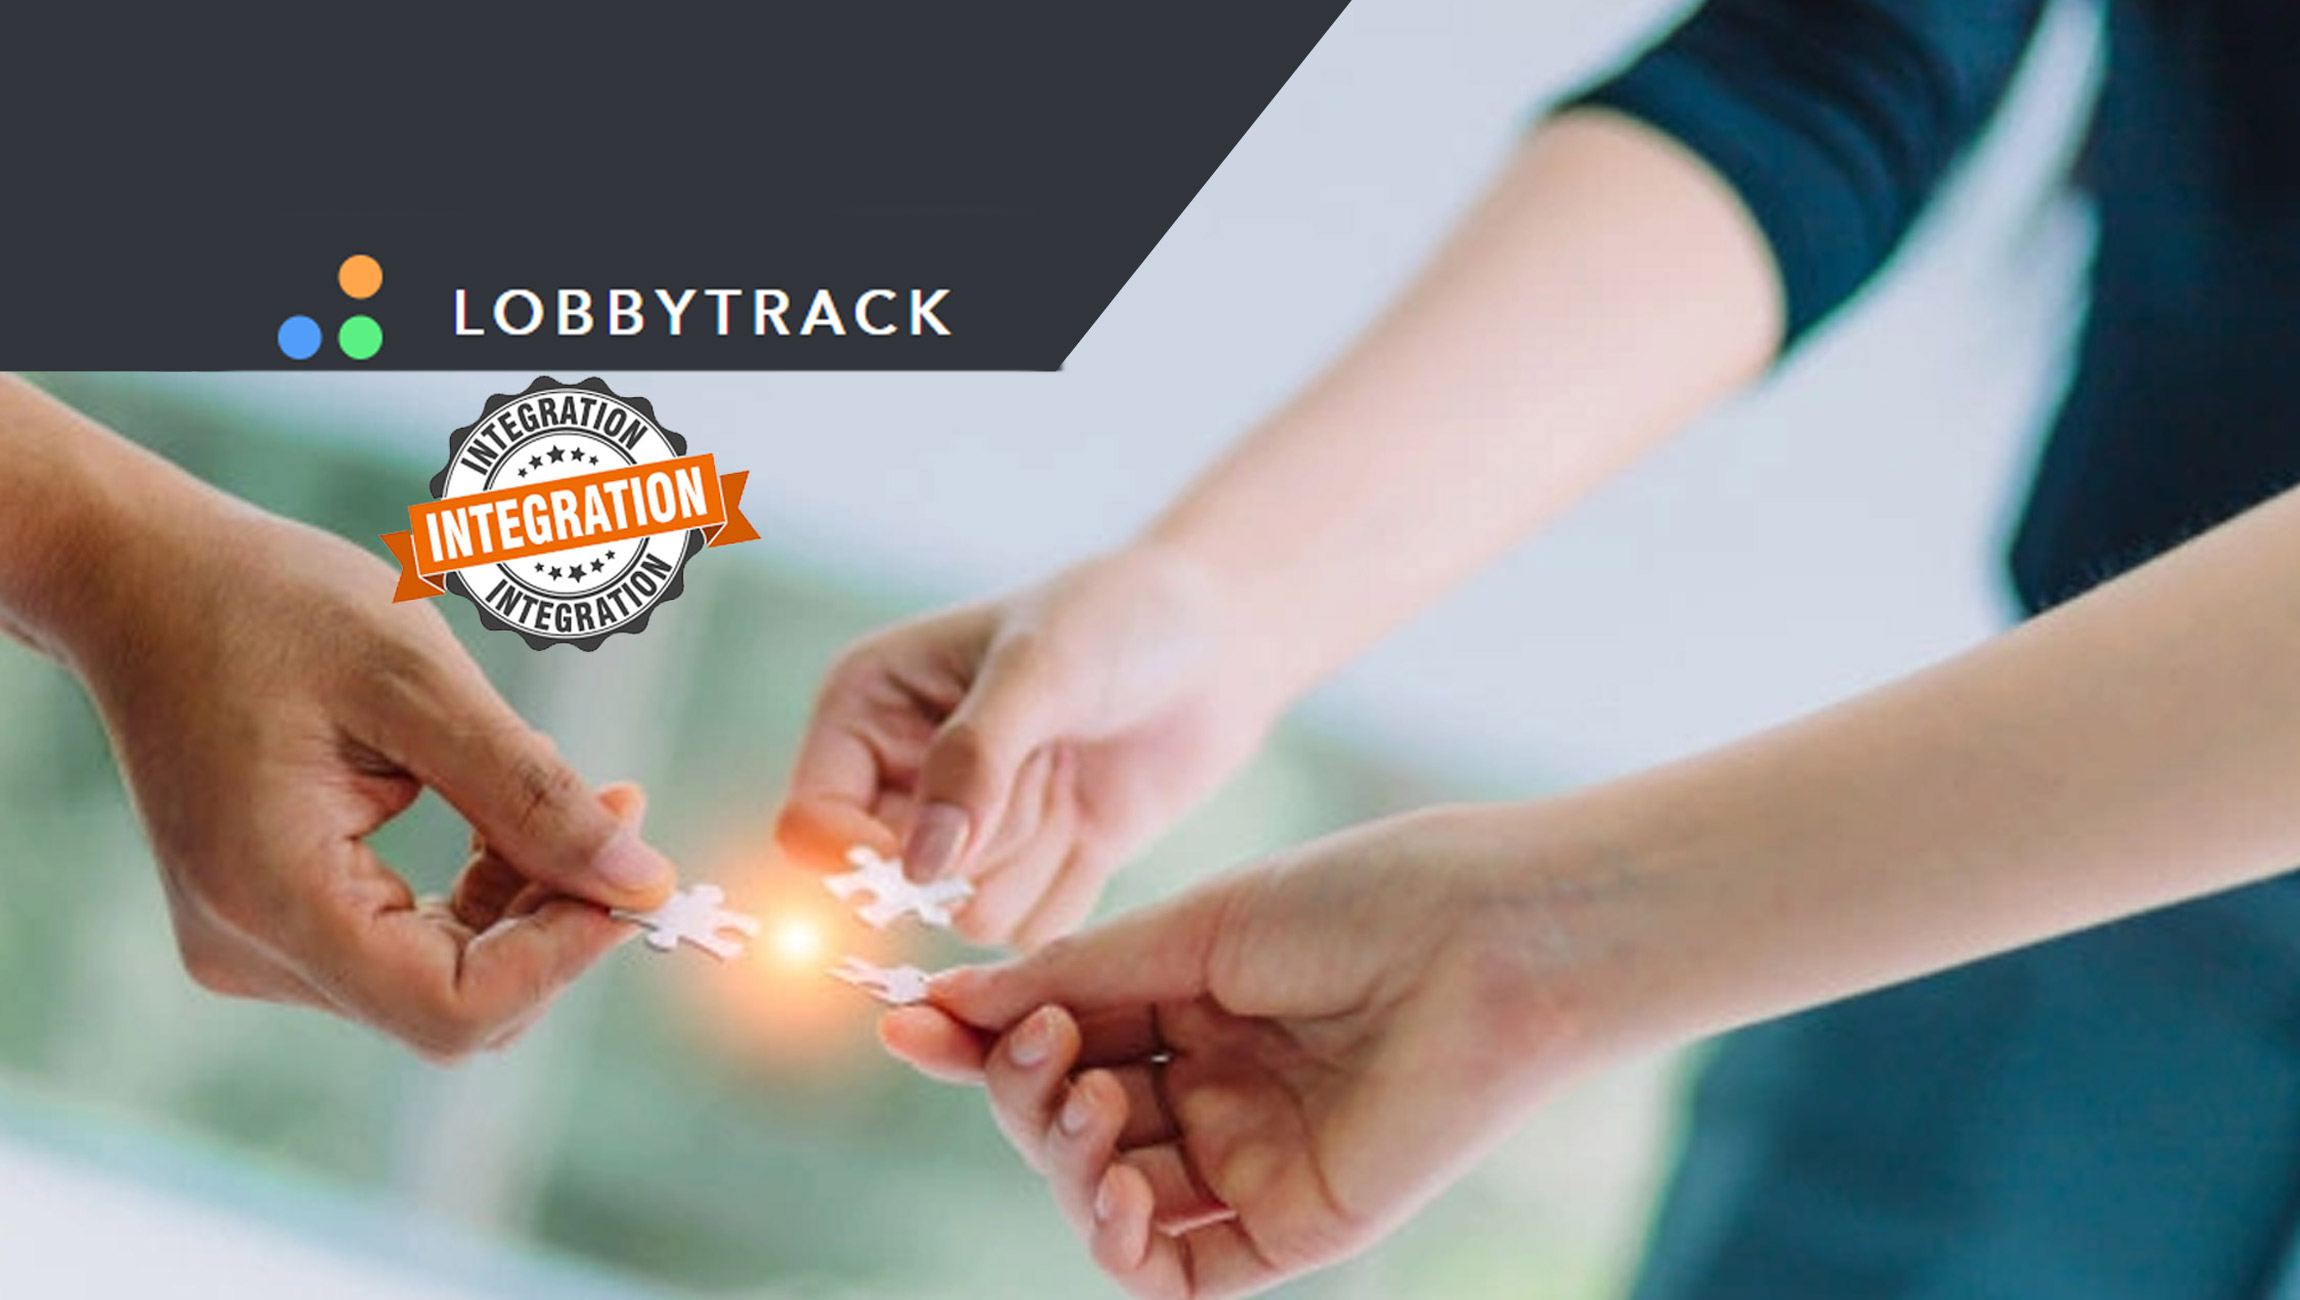 Lobbytrack-Integrates-with-Brivo_-the-Largest-Cloud-Based-Access-Control-Provider_-to-Bring-More-Convenience-and-Security-to-Workplace